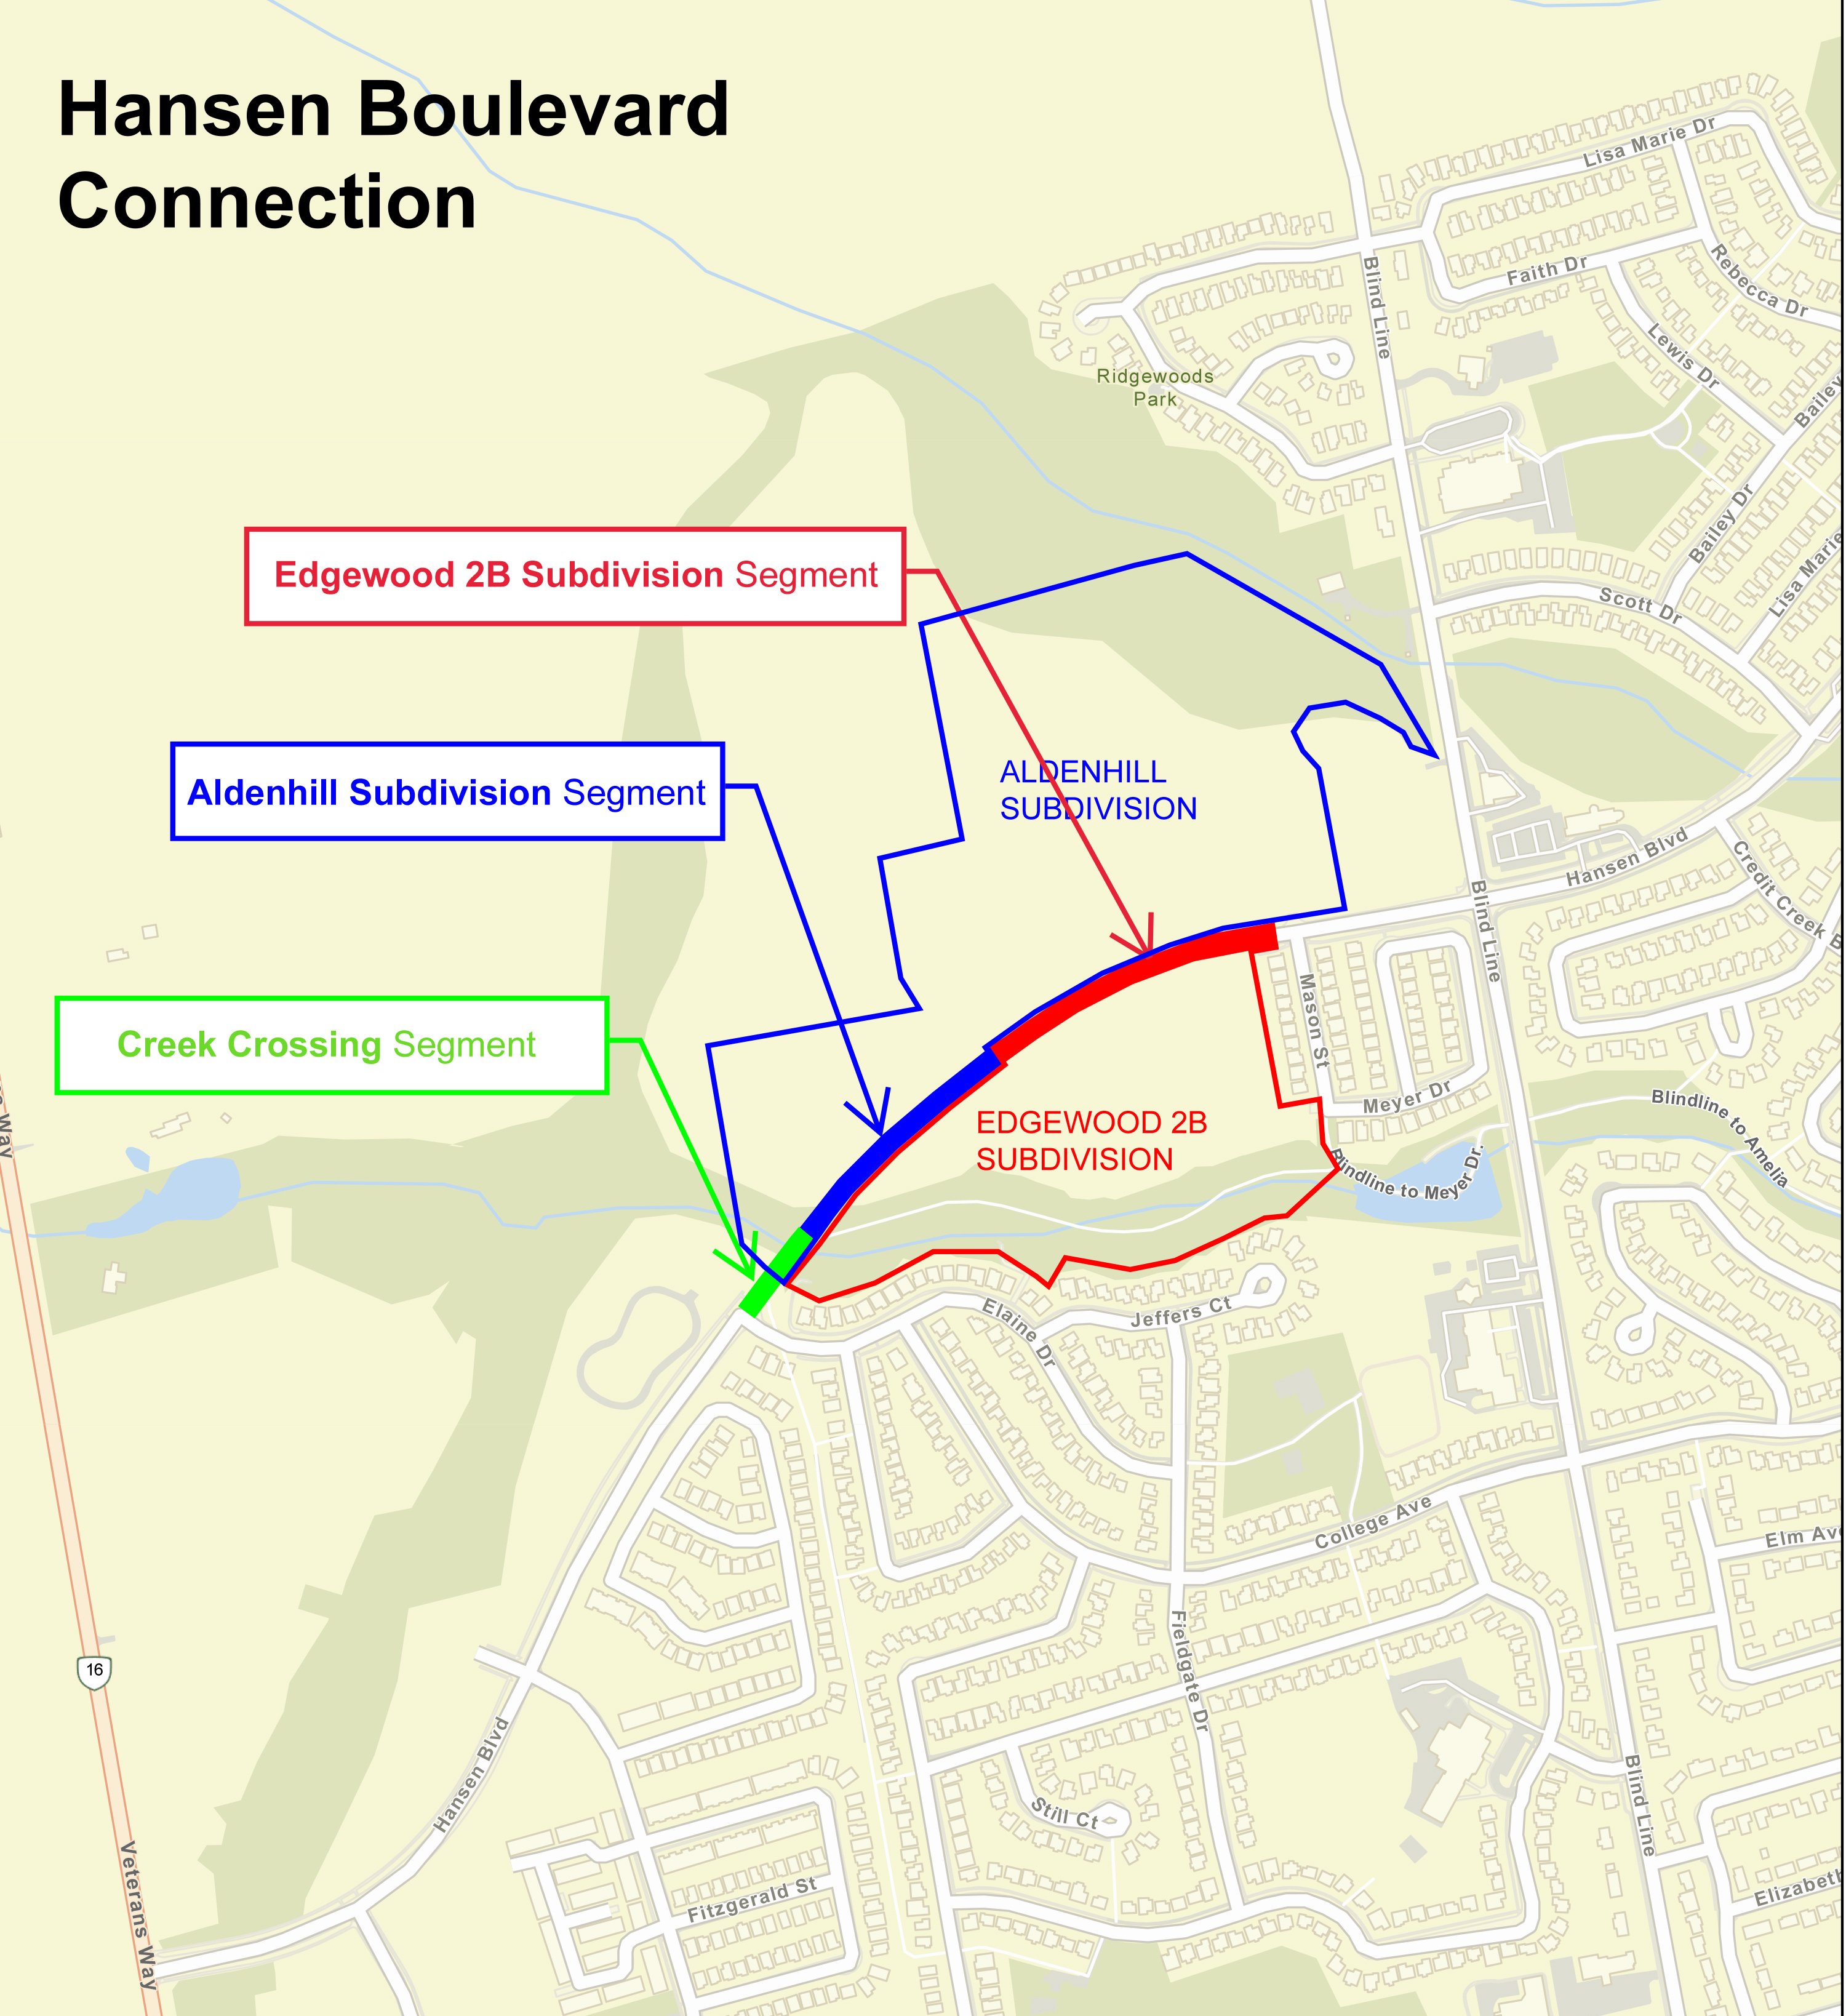 A map indicating the remaining portions of the Hansen Boulevard Connection in the Town of Orangeville